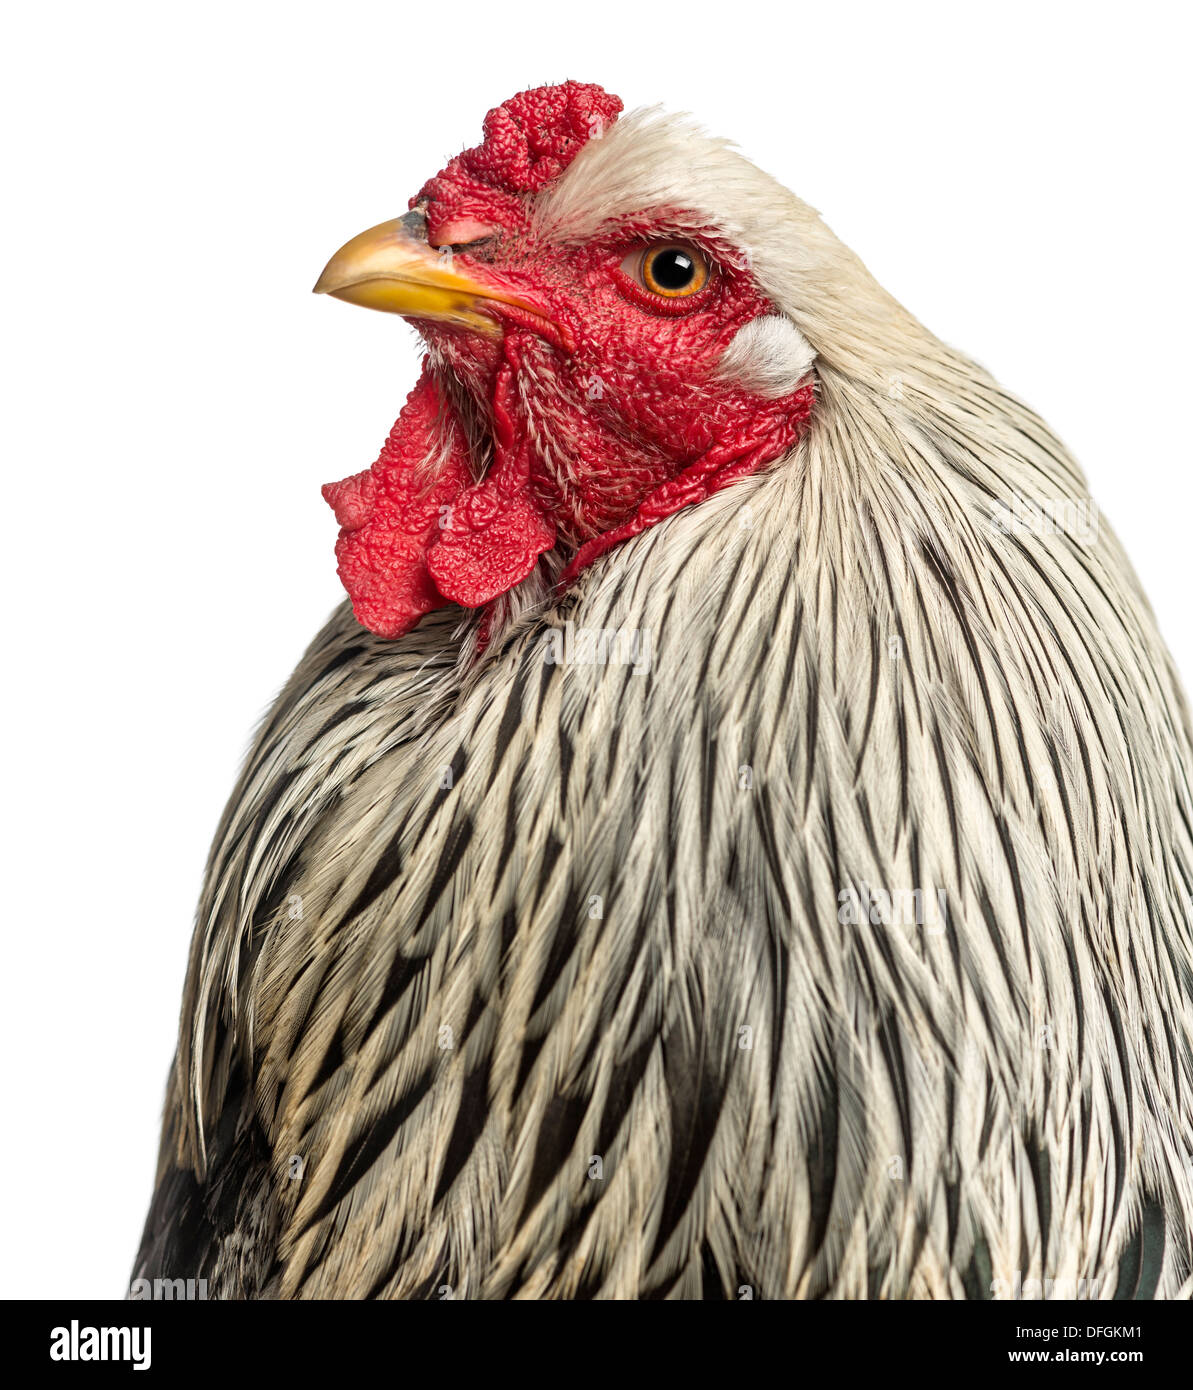 Close up of a Brahma Rooster against white background Stock Photo